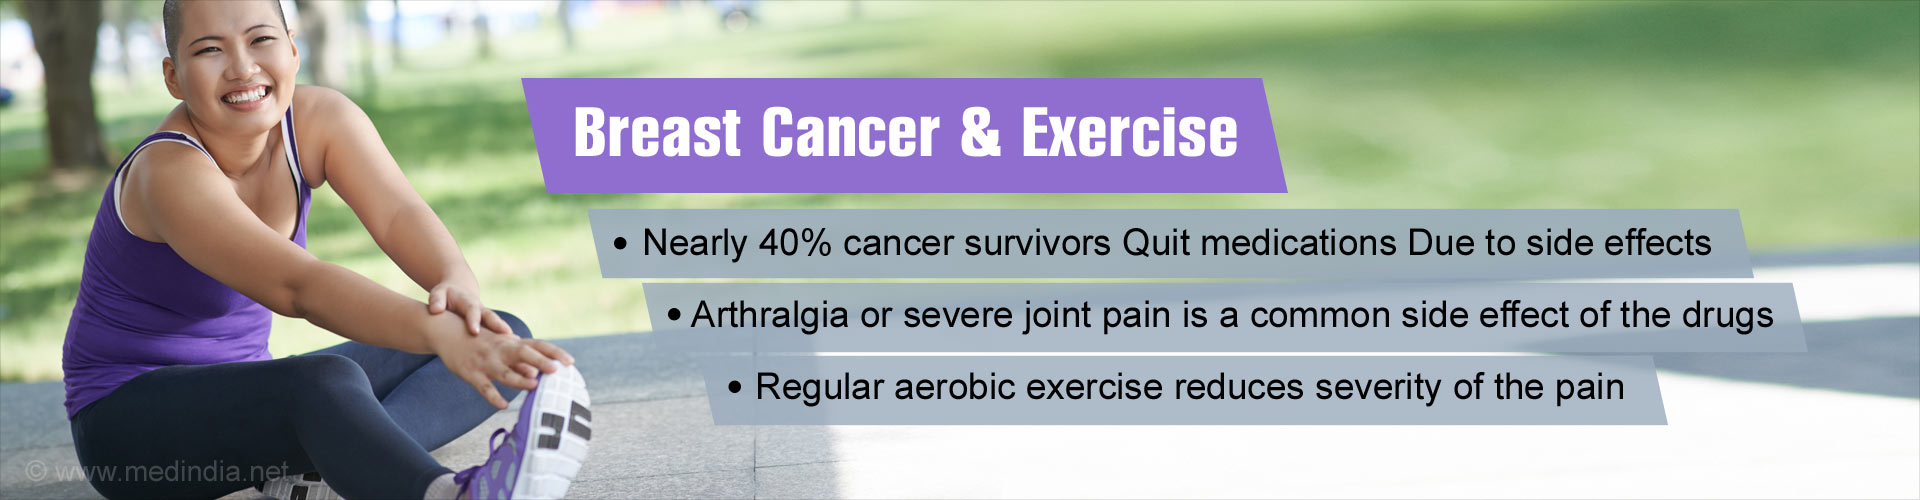 Breast Cancer & Exercise
- Nearly 40% cancer survivors quit smoking due to side effects
- Arthralgia or severe joint pain is a common side effect of the drugs
- Regular aerobic exercise reduces severity of the pain